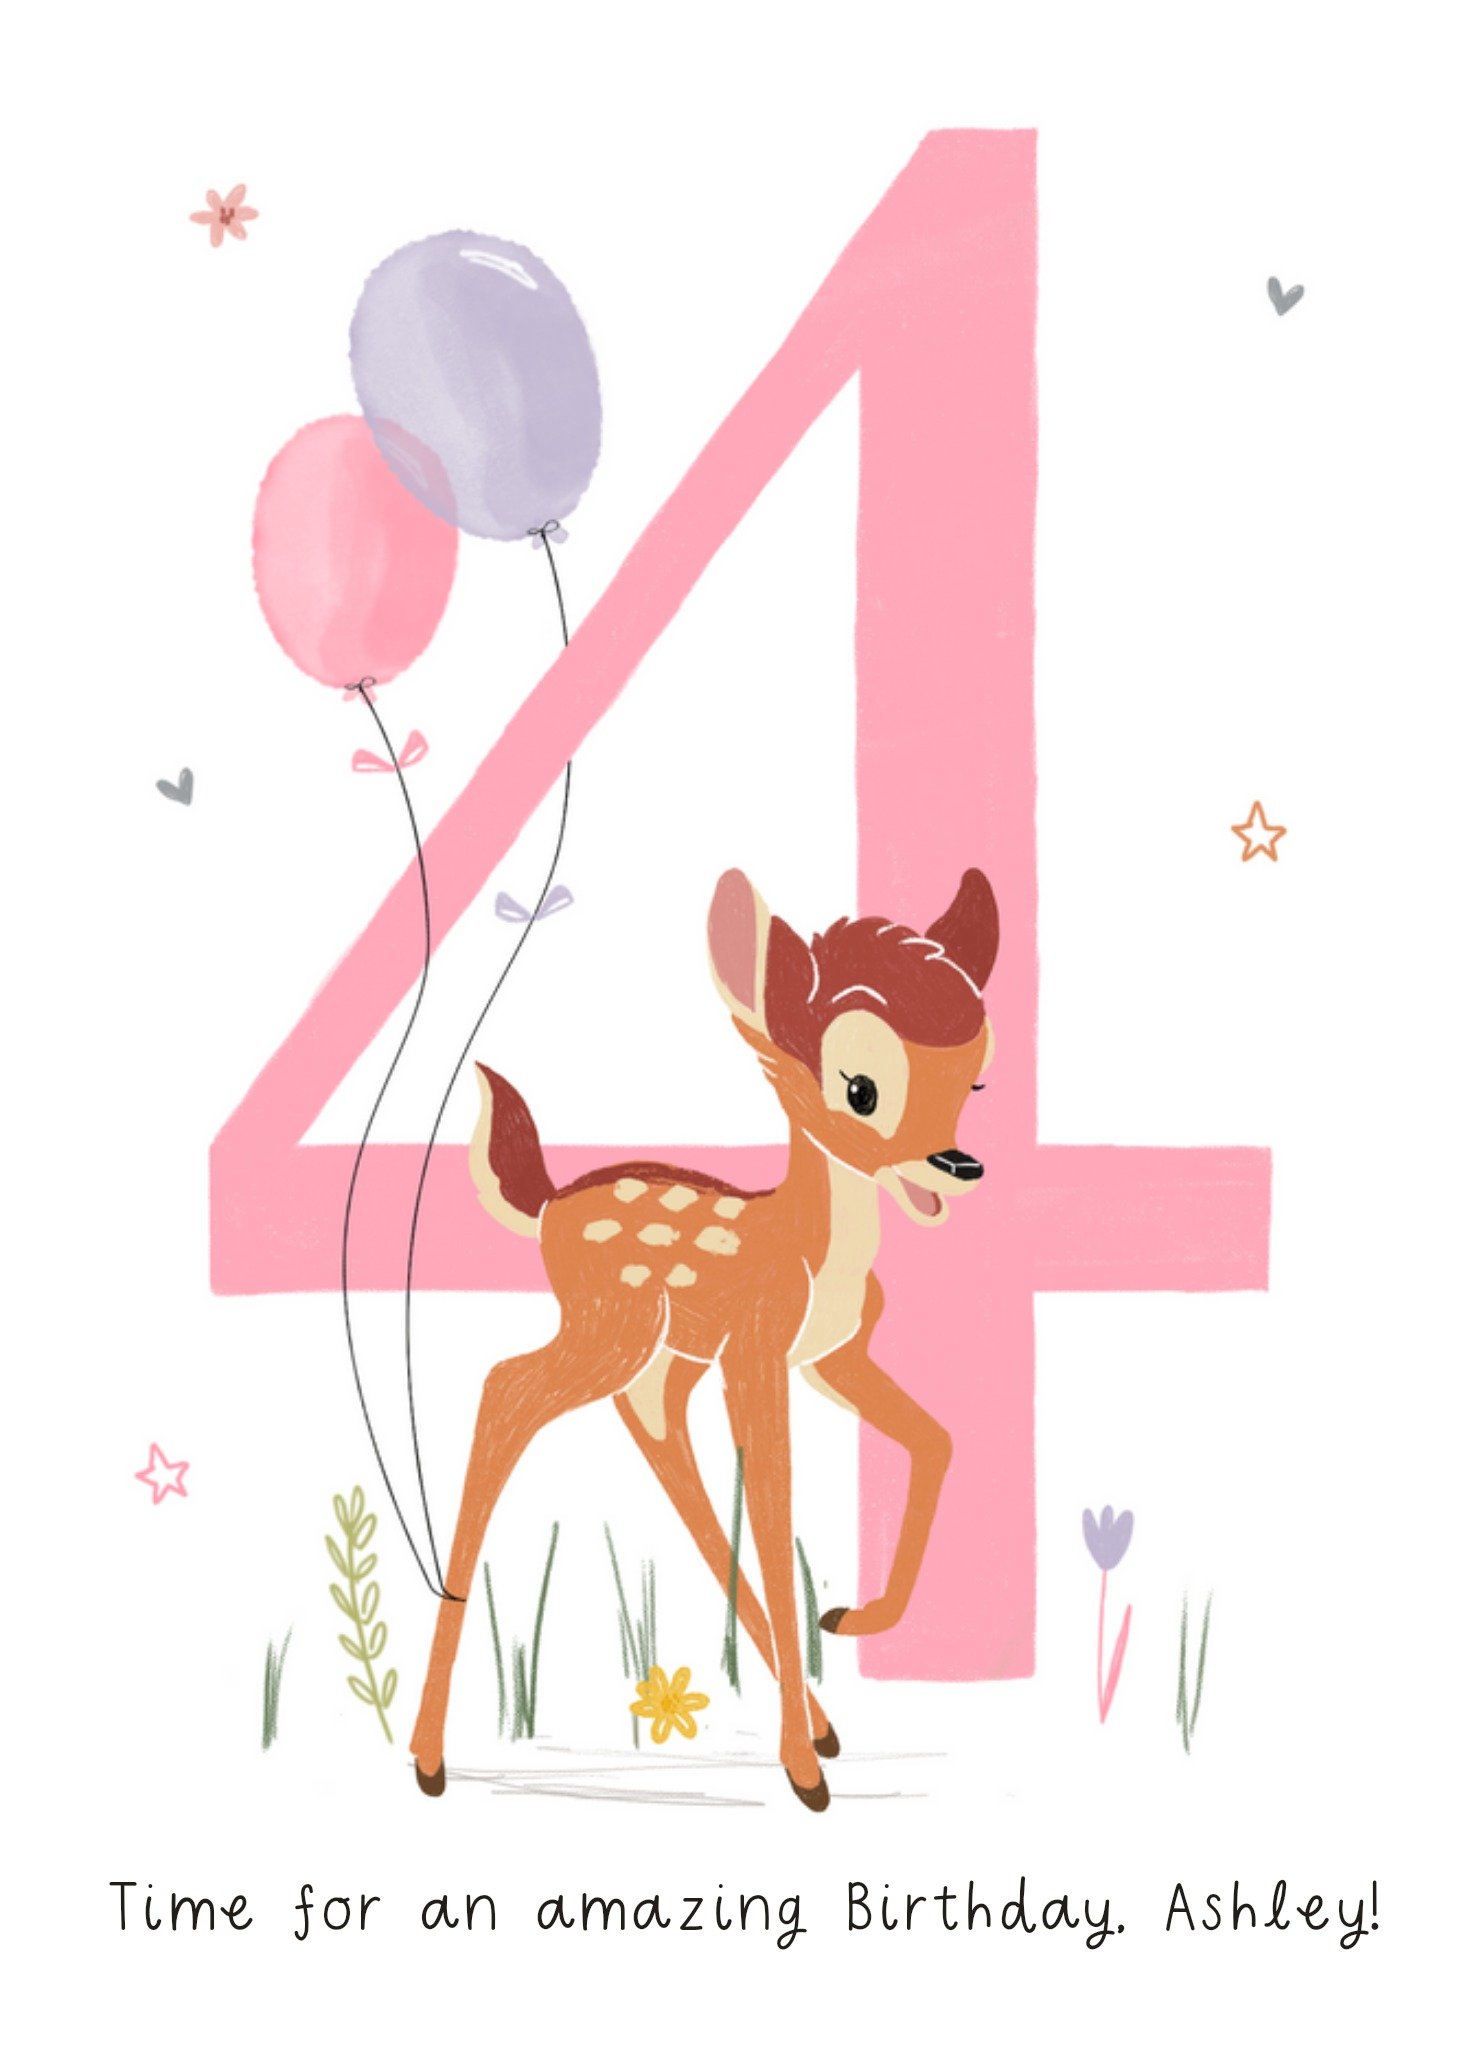 Disney Bambi 4 Today Time For An Amazing Birthday Illustrated Bambi Birthday Card, Large